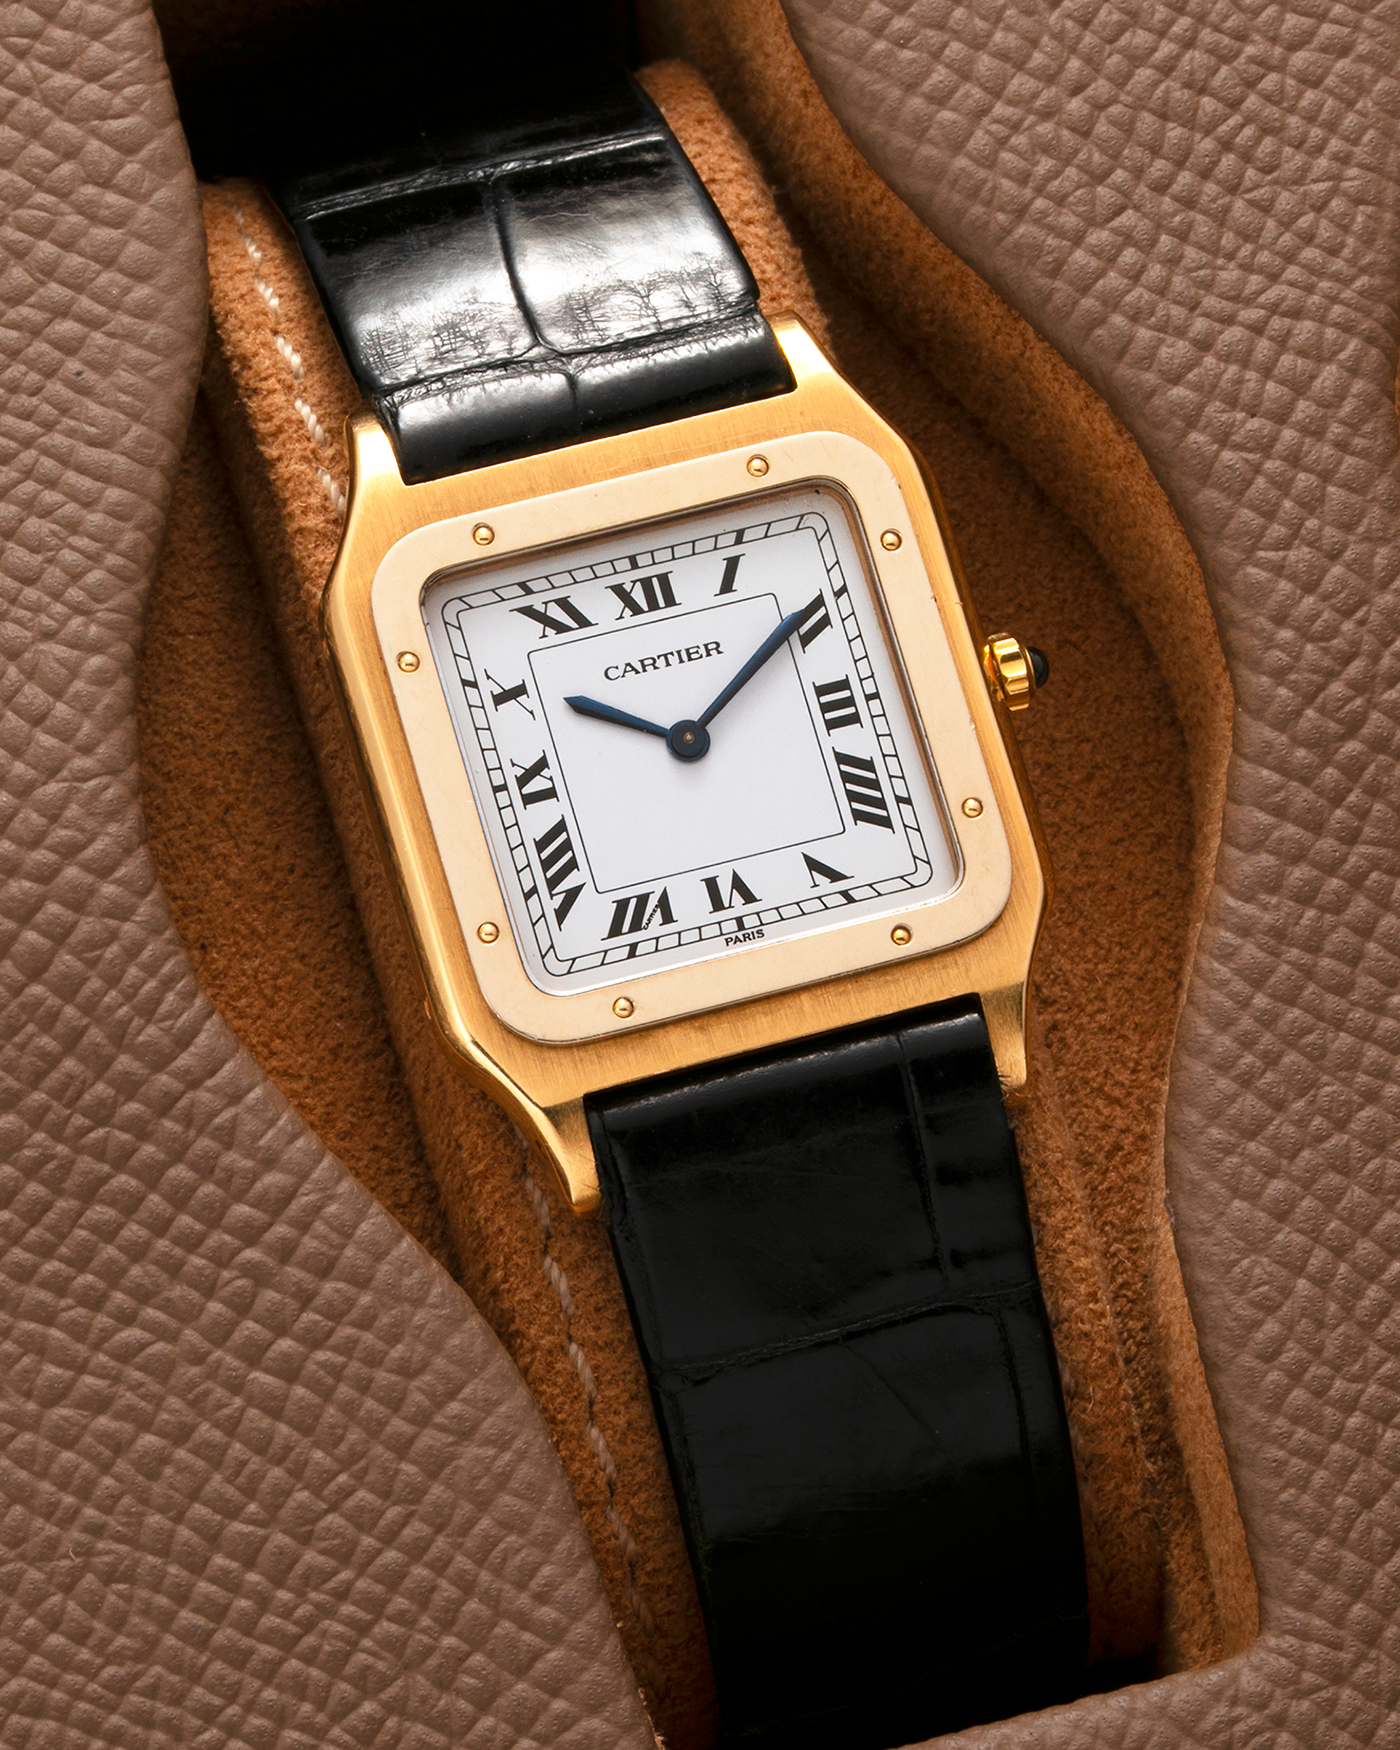 Brand: Cartier Year: 1980s Model: Santos Dumont Reference: 1575 Material: 18-carat Yellow Gold Movement: Frédéric Piguet based Cal. 021 MC, Manual-Winding Case Diameter: 27mm x 36mm Strap: Cartier Black Leather Strap with Signed 18-carat Yellow Gold Tang Buckle